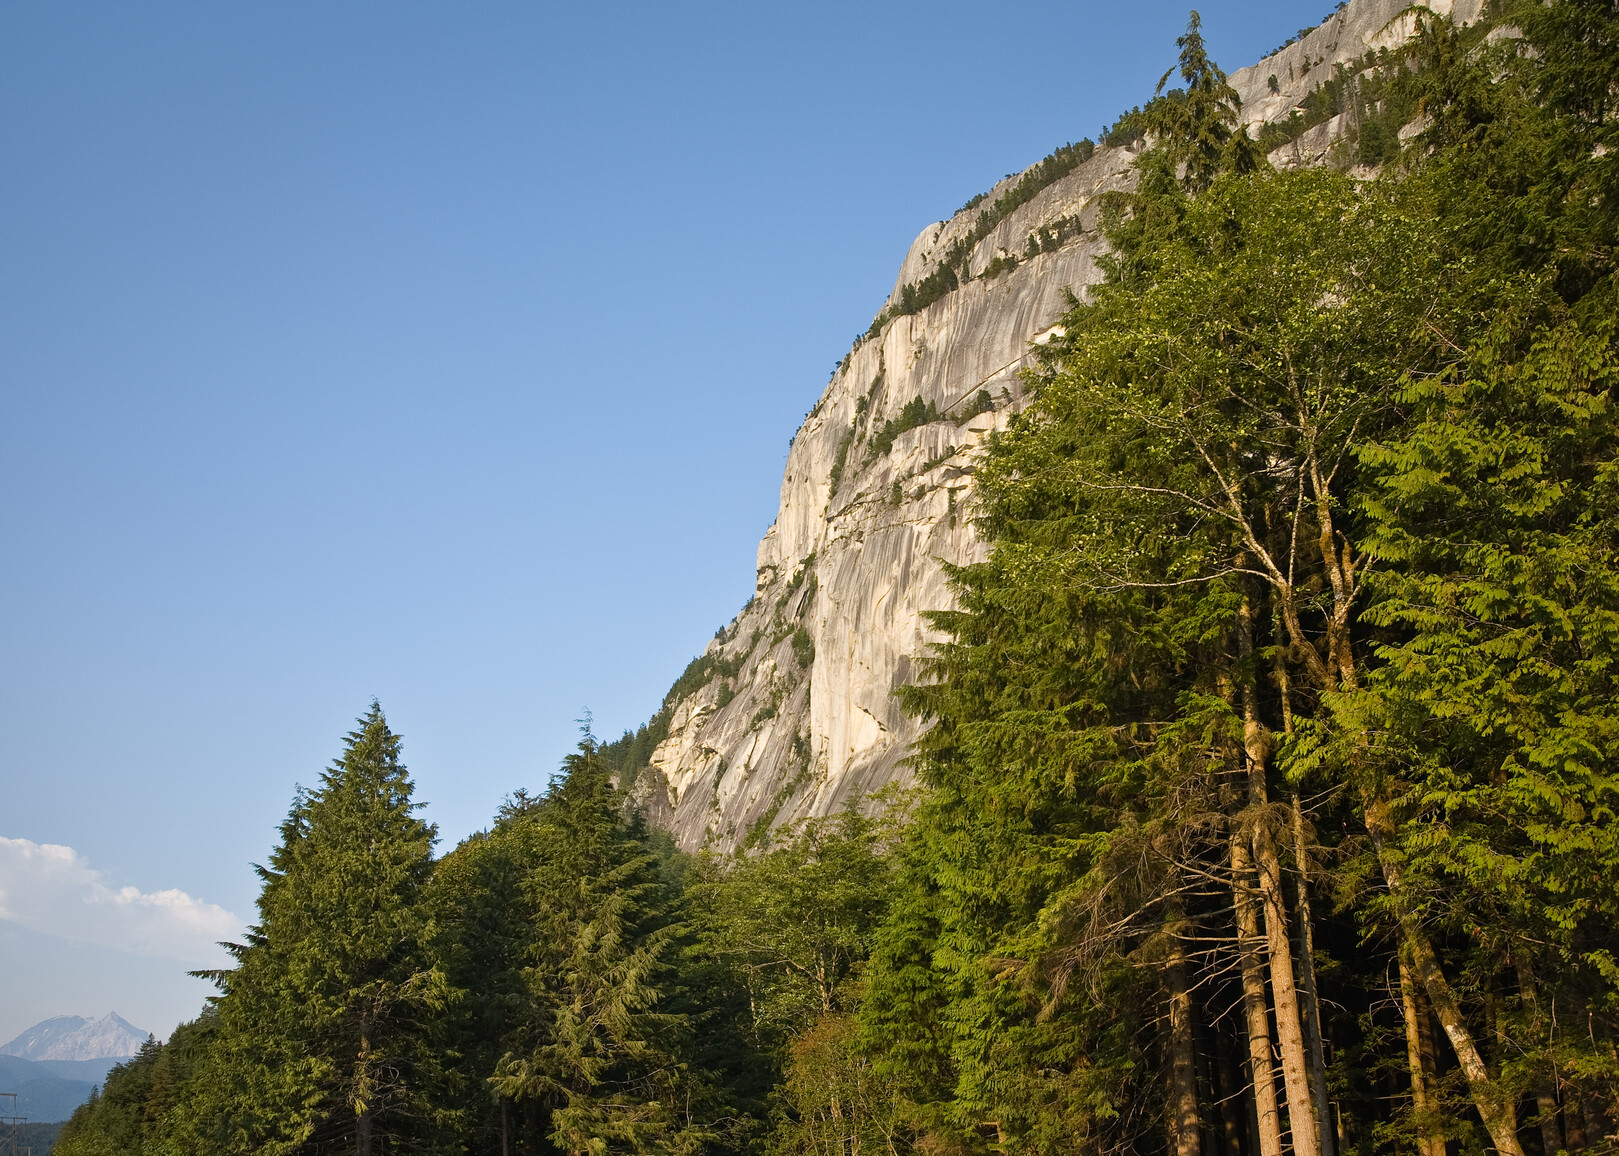 From the base of the mountain, a view of Stawamus Chief.